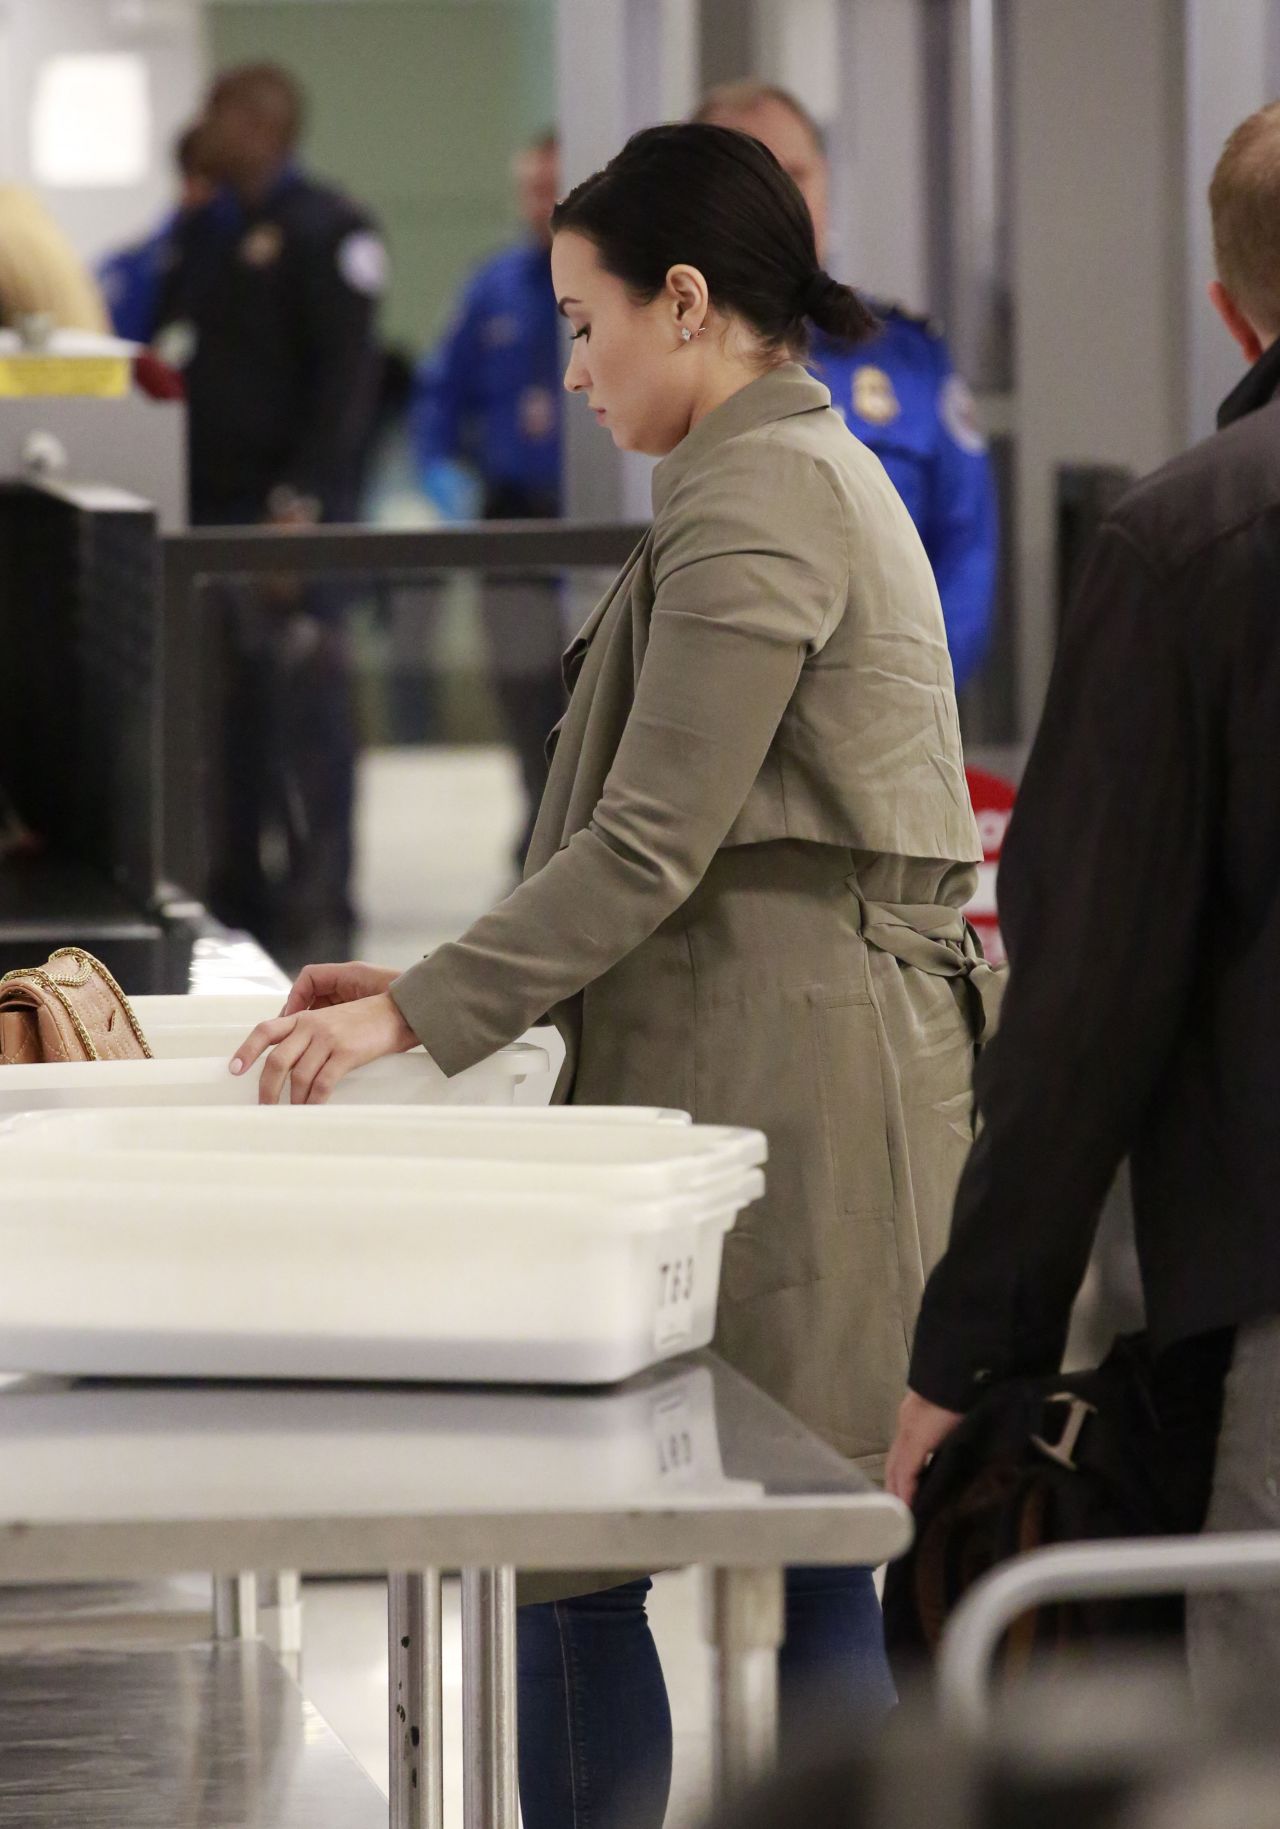 Demi Lovato Arrives at LAX Airport May 6, 2011 – Star Style